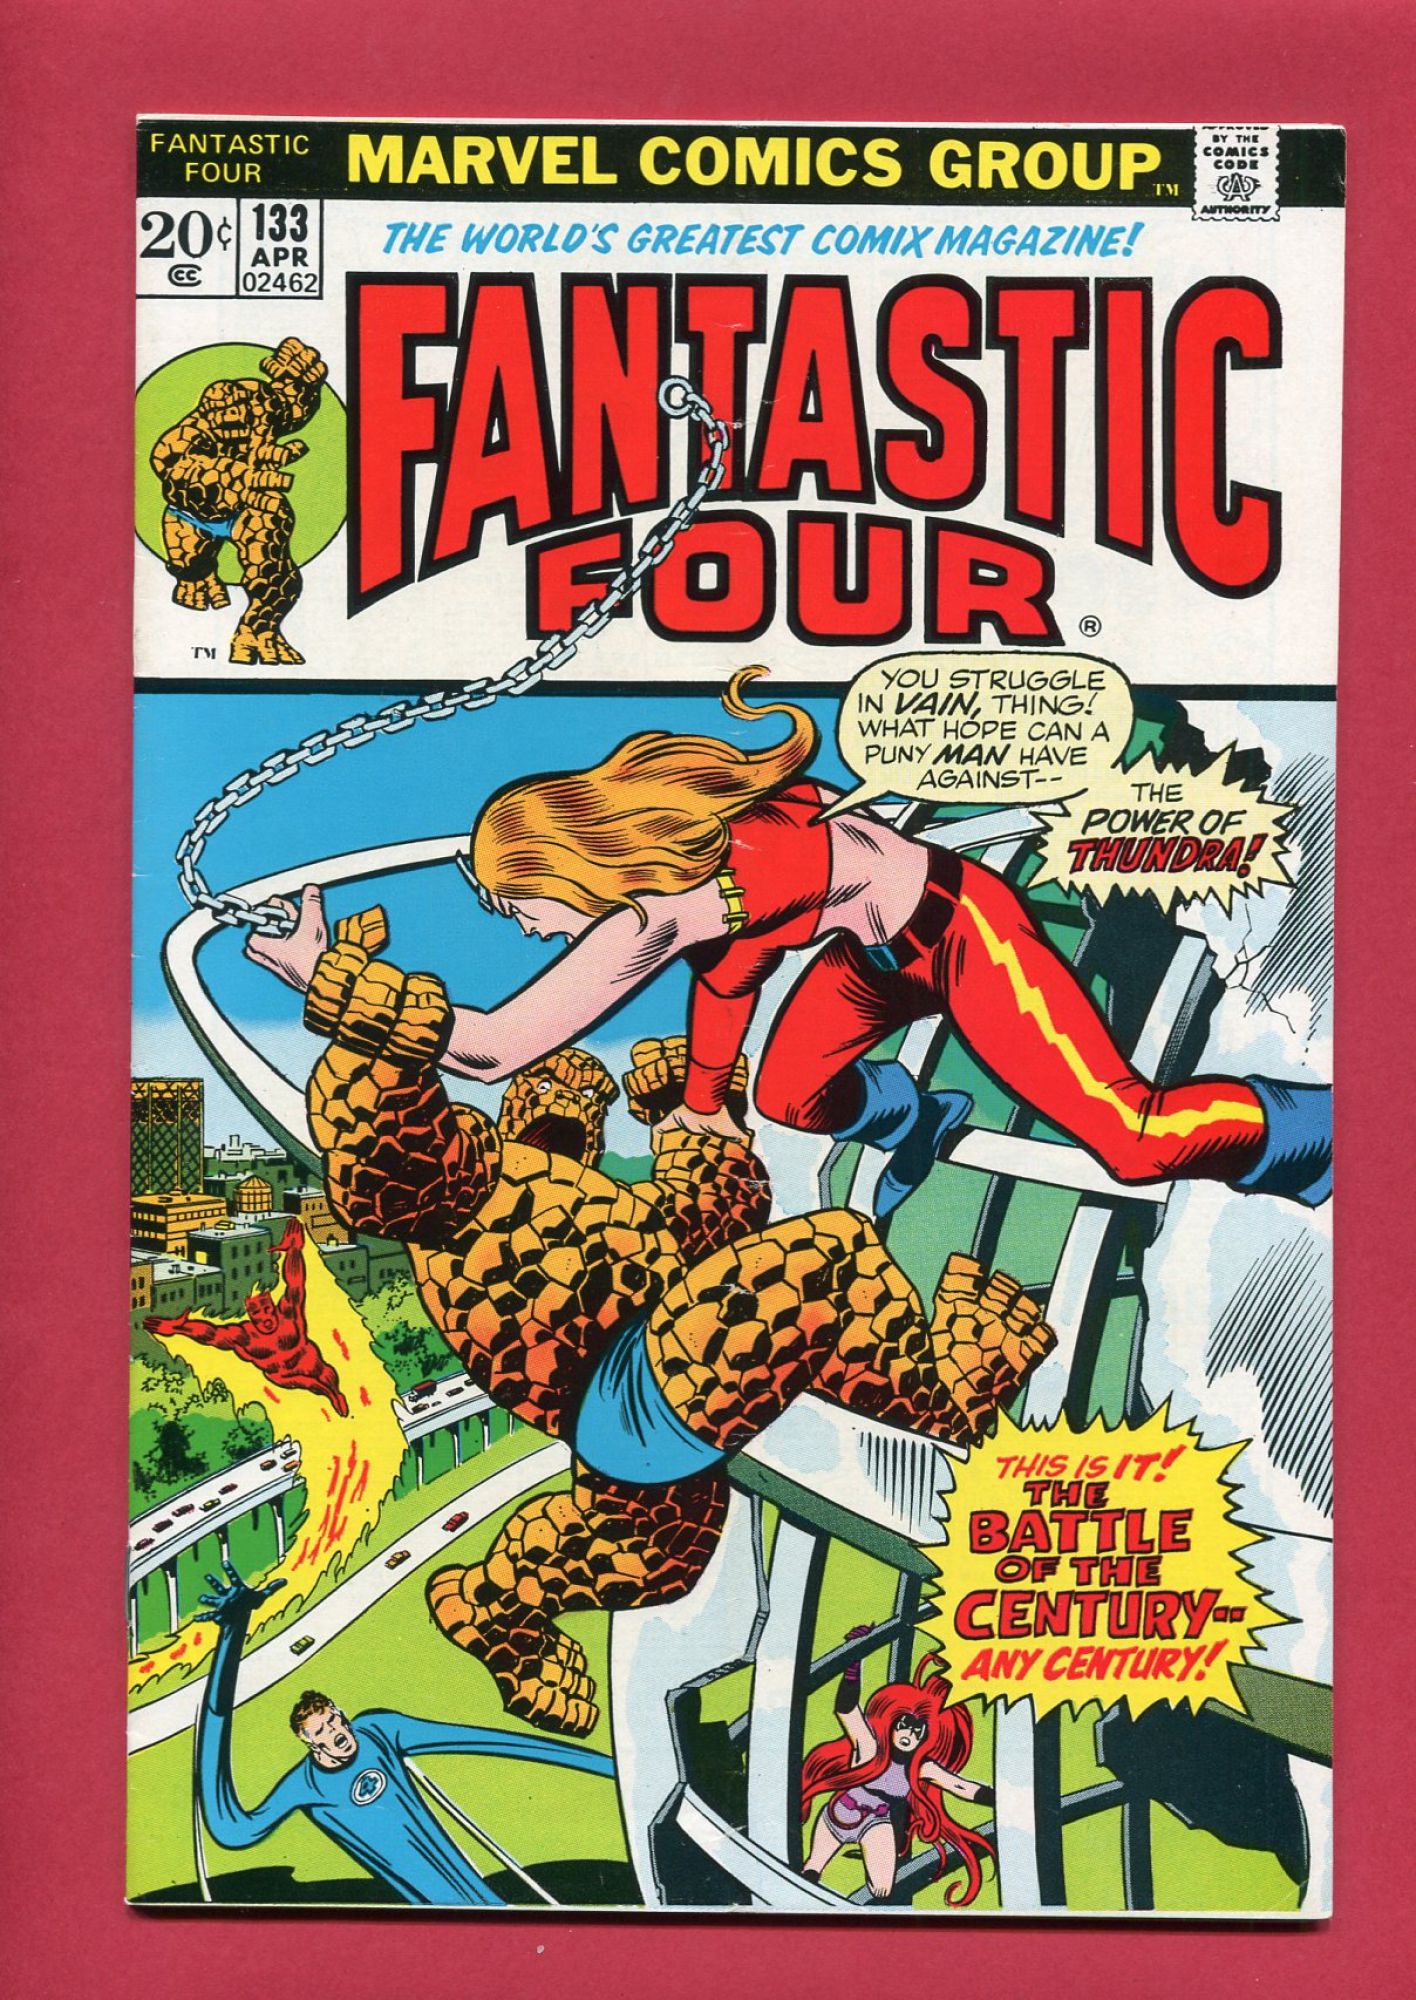 Fantastic Four #133, Apr 1973, 5.0 VG/FN DOUBLE COVER